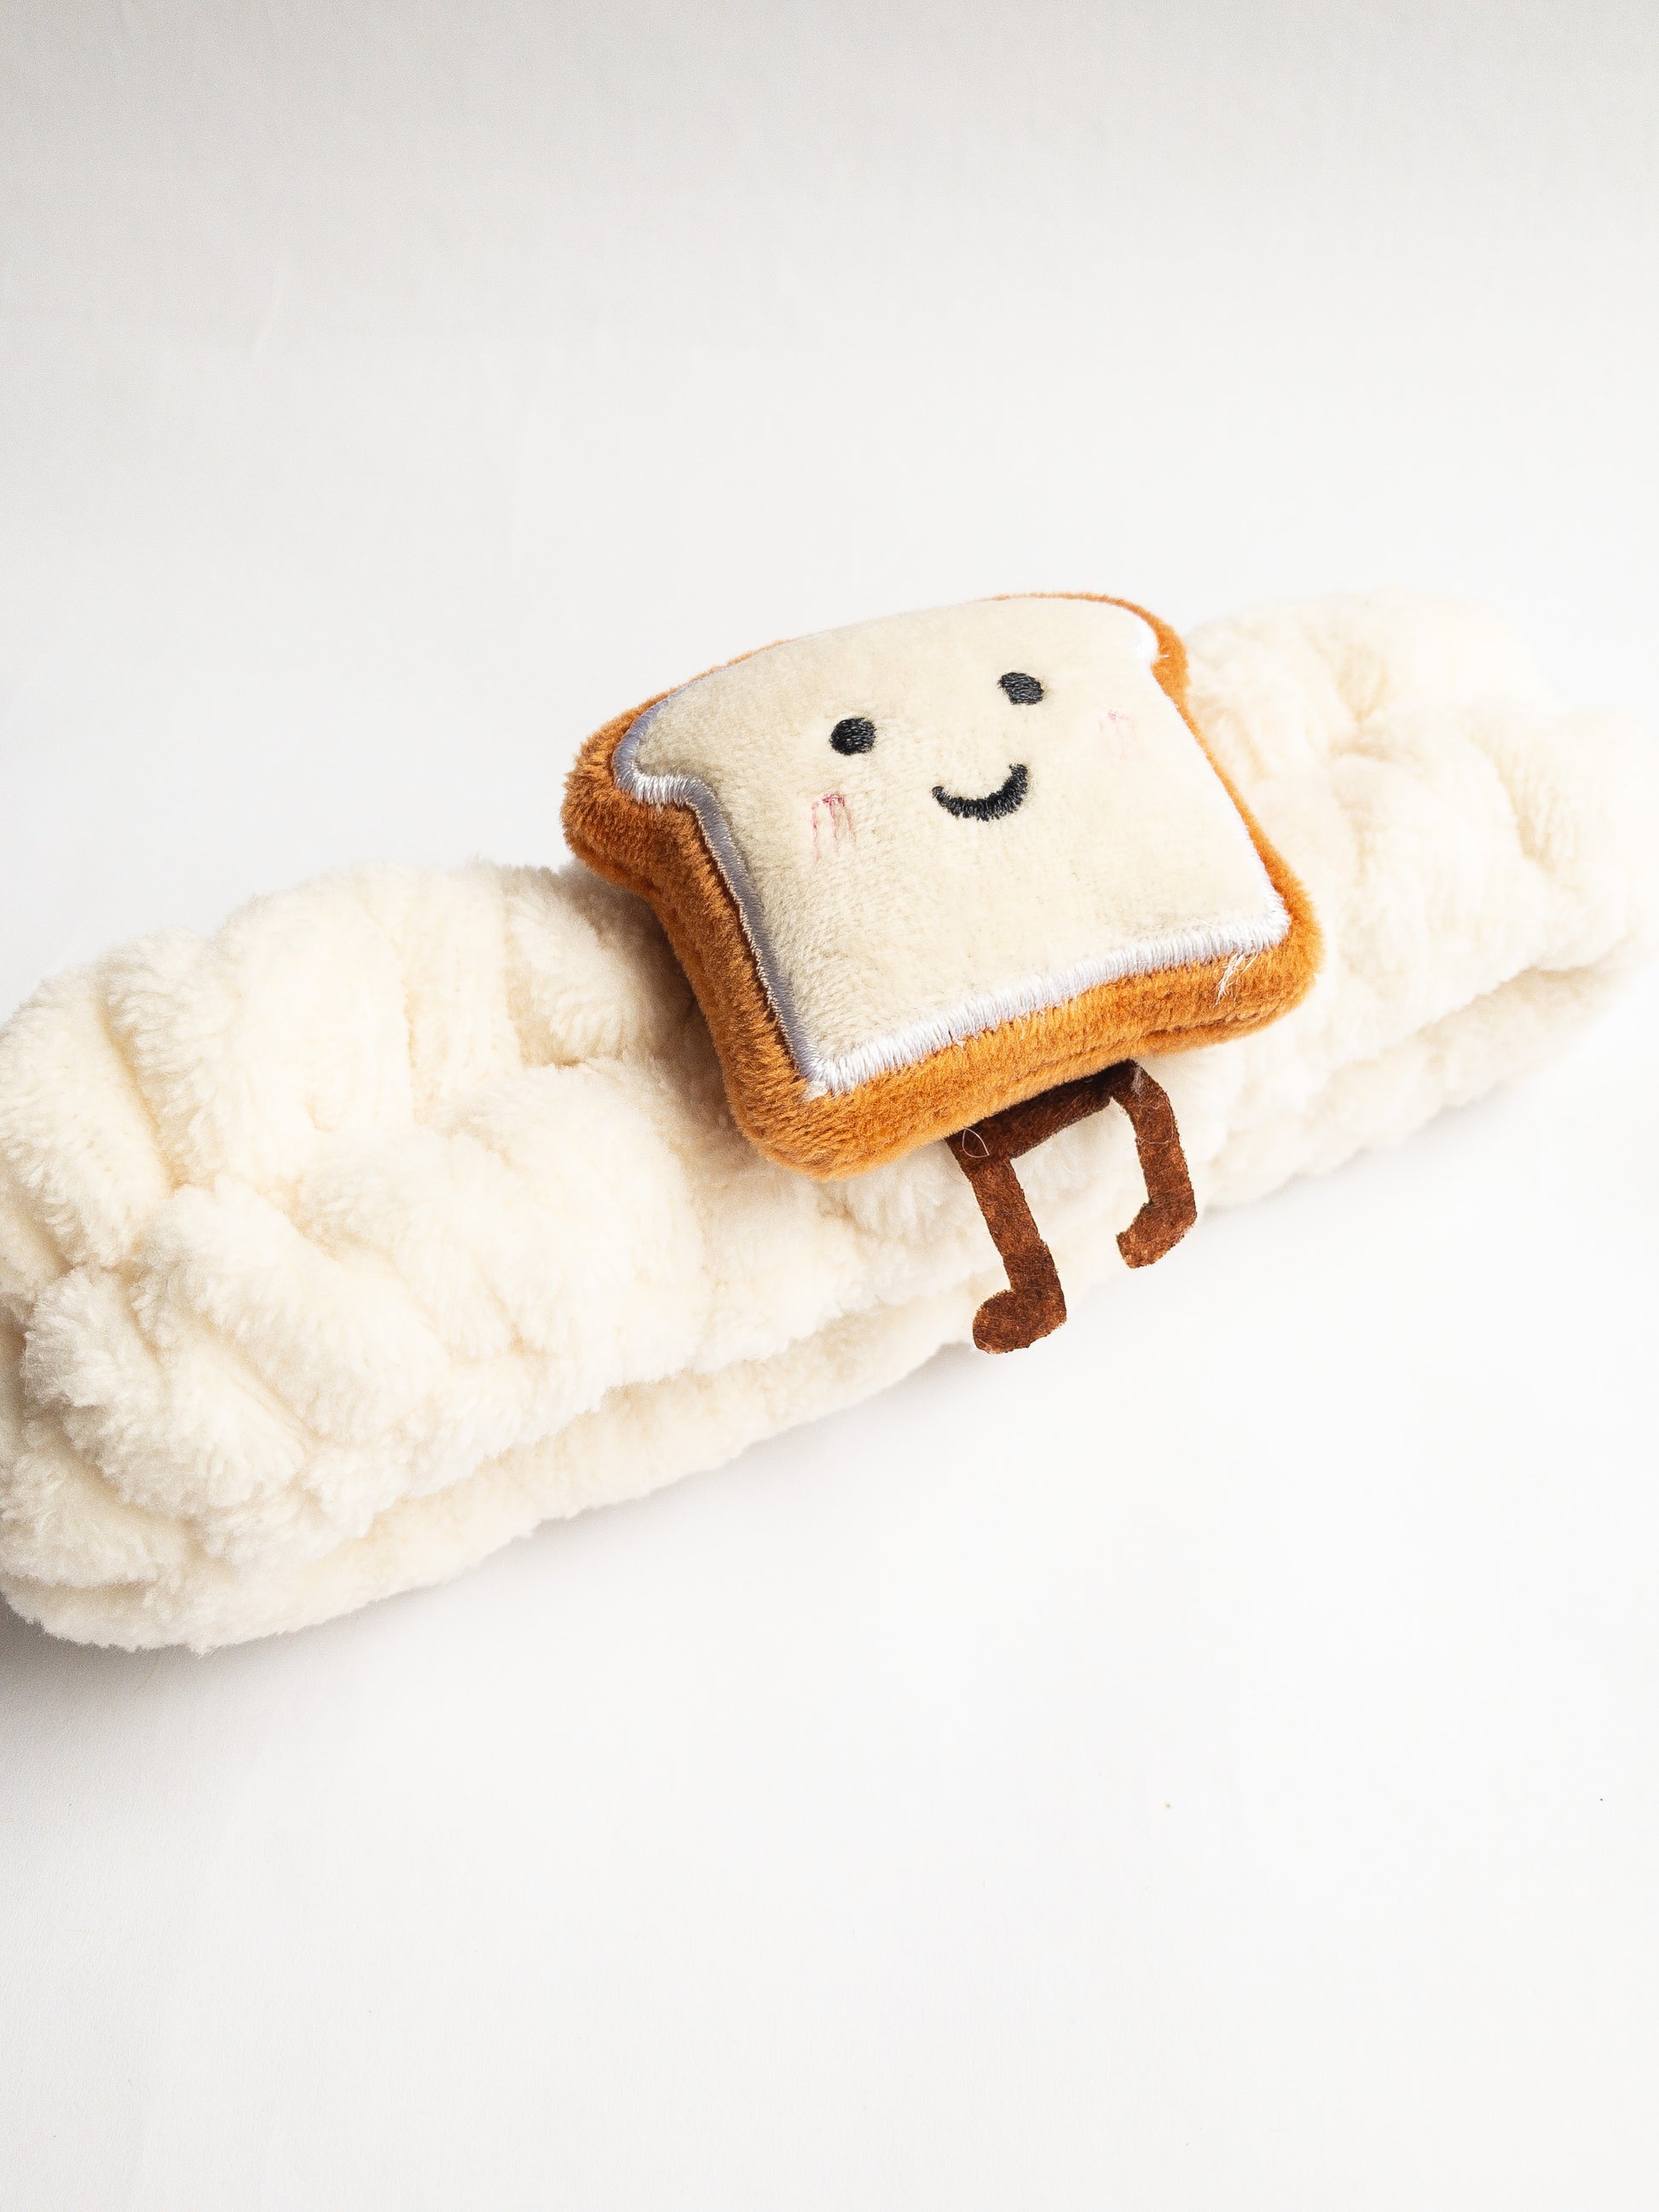 Our adorable brick toast plush spa headband makes the perfect accessory for all your spa days! Each headband is so soft and comfy with a cute and happy little brick toast. Pamper yourself in plushy-goodness and sweet, sweet relaxation! Go ahead, you deserve it!